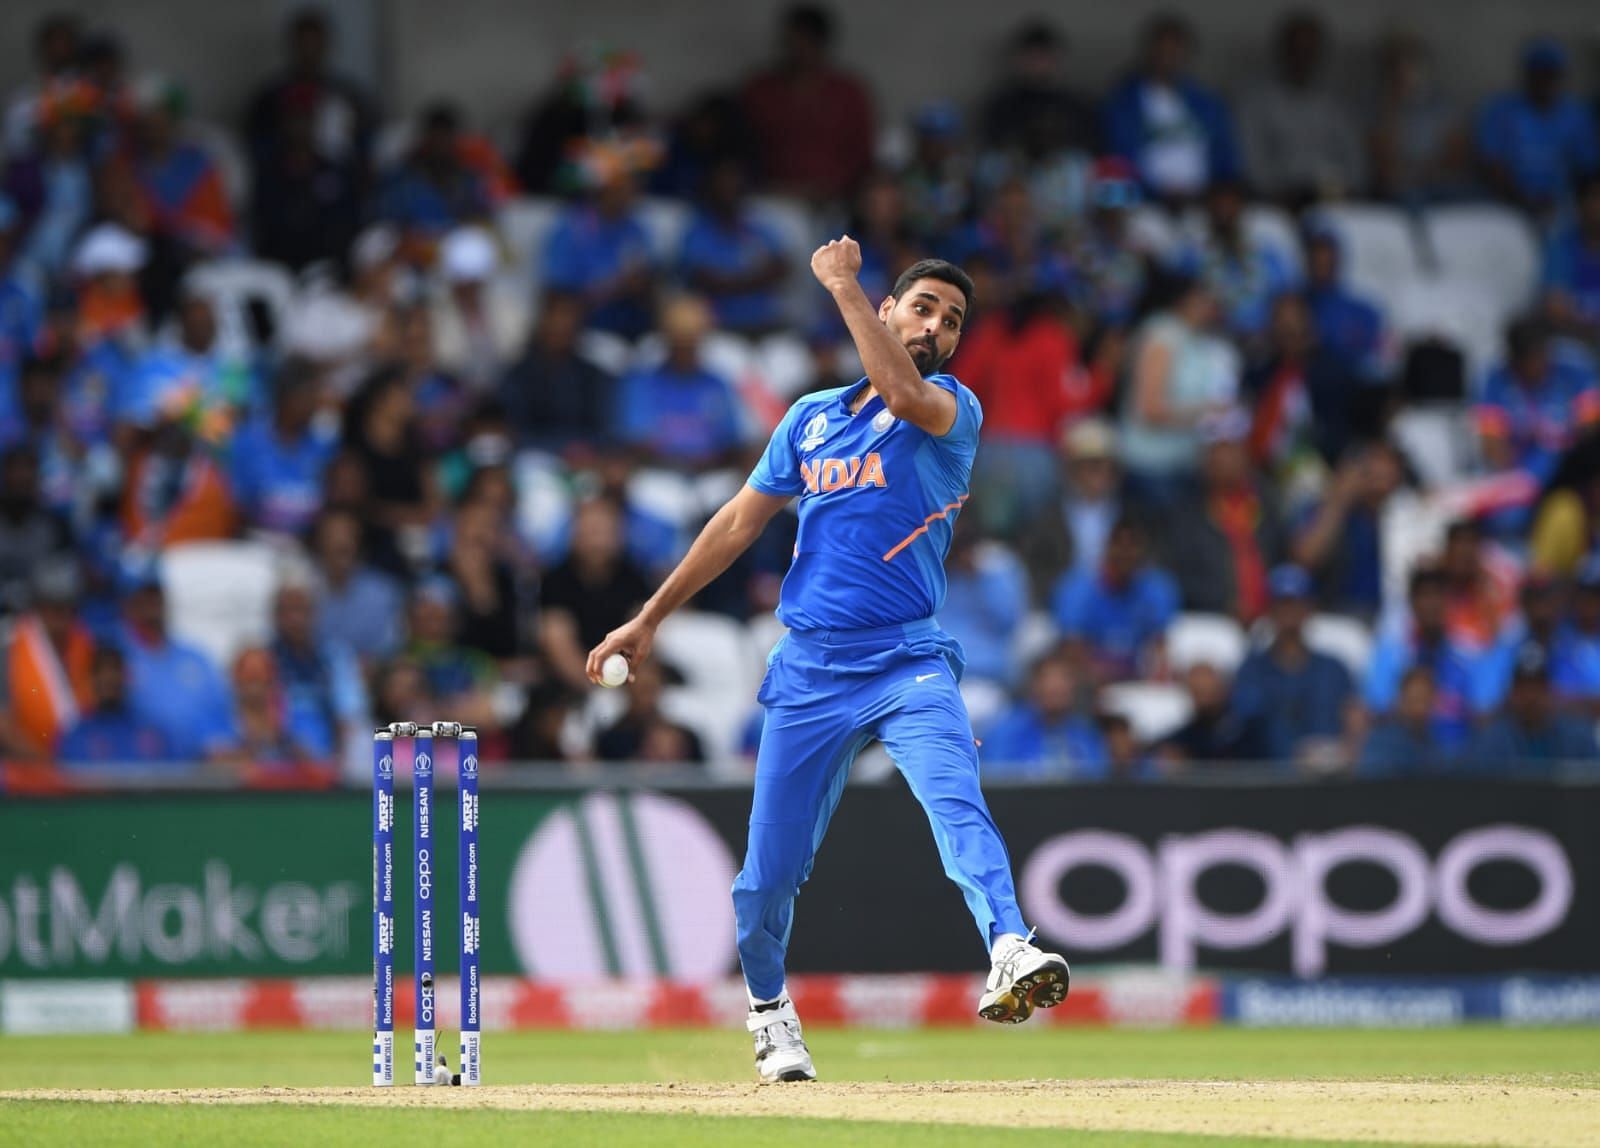 Bhuvneshwar Kumar had a miserly economy rate of 6.25 in the World T20. [Pic Credit - ICC]